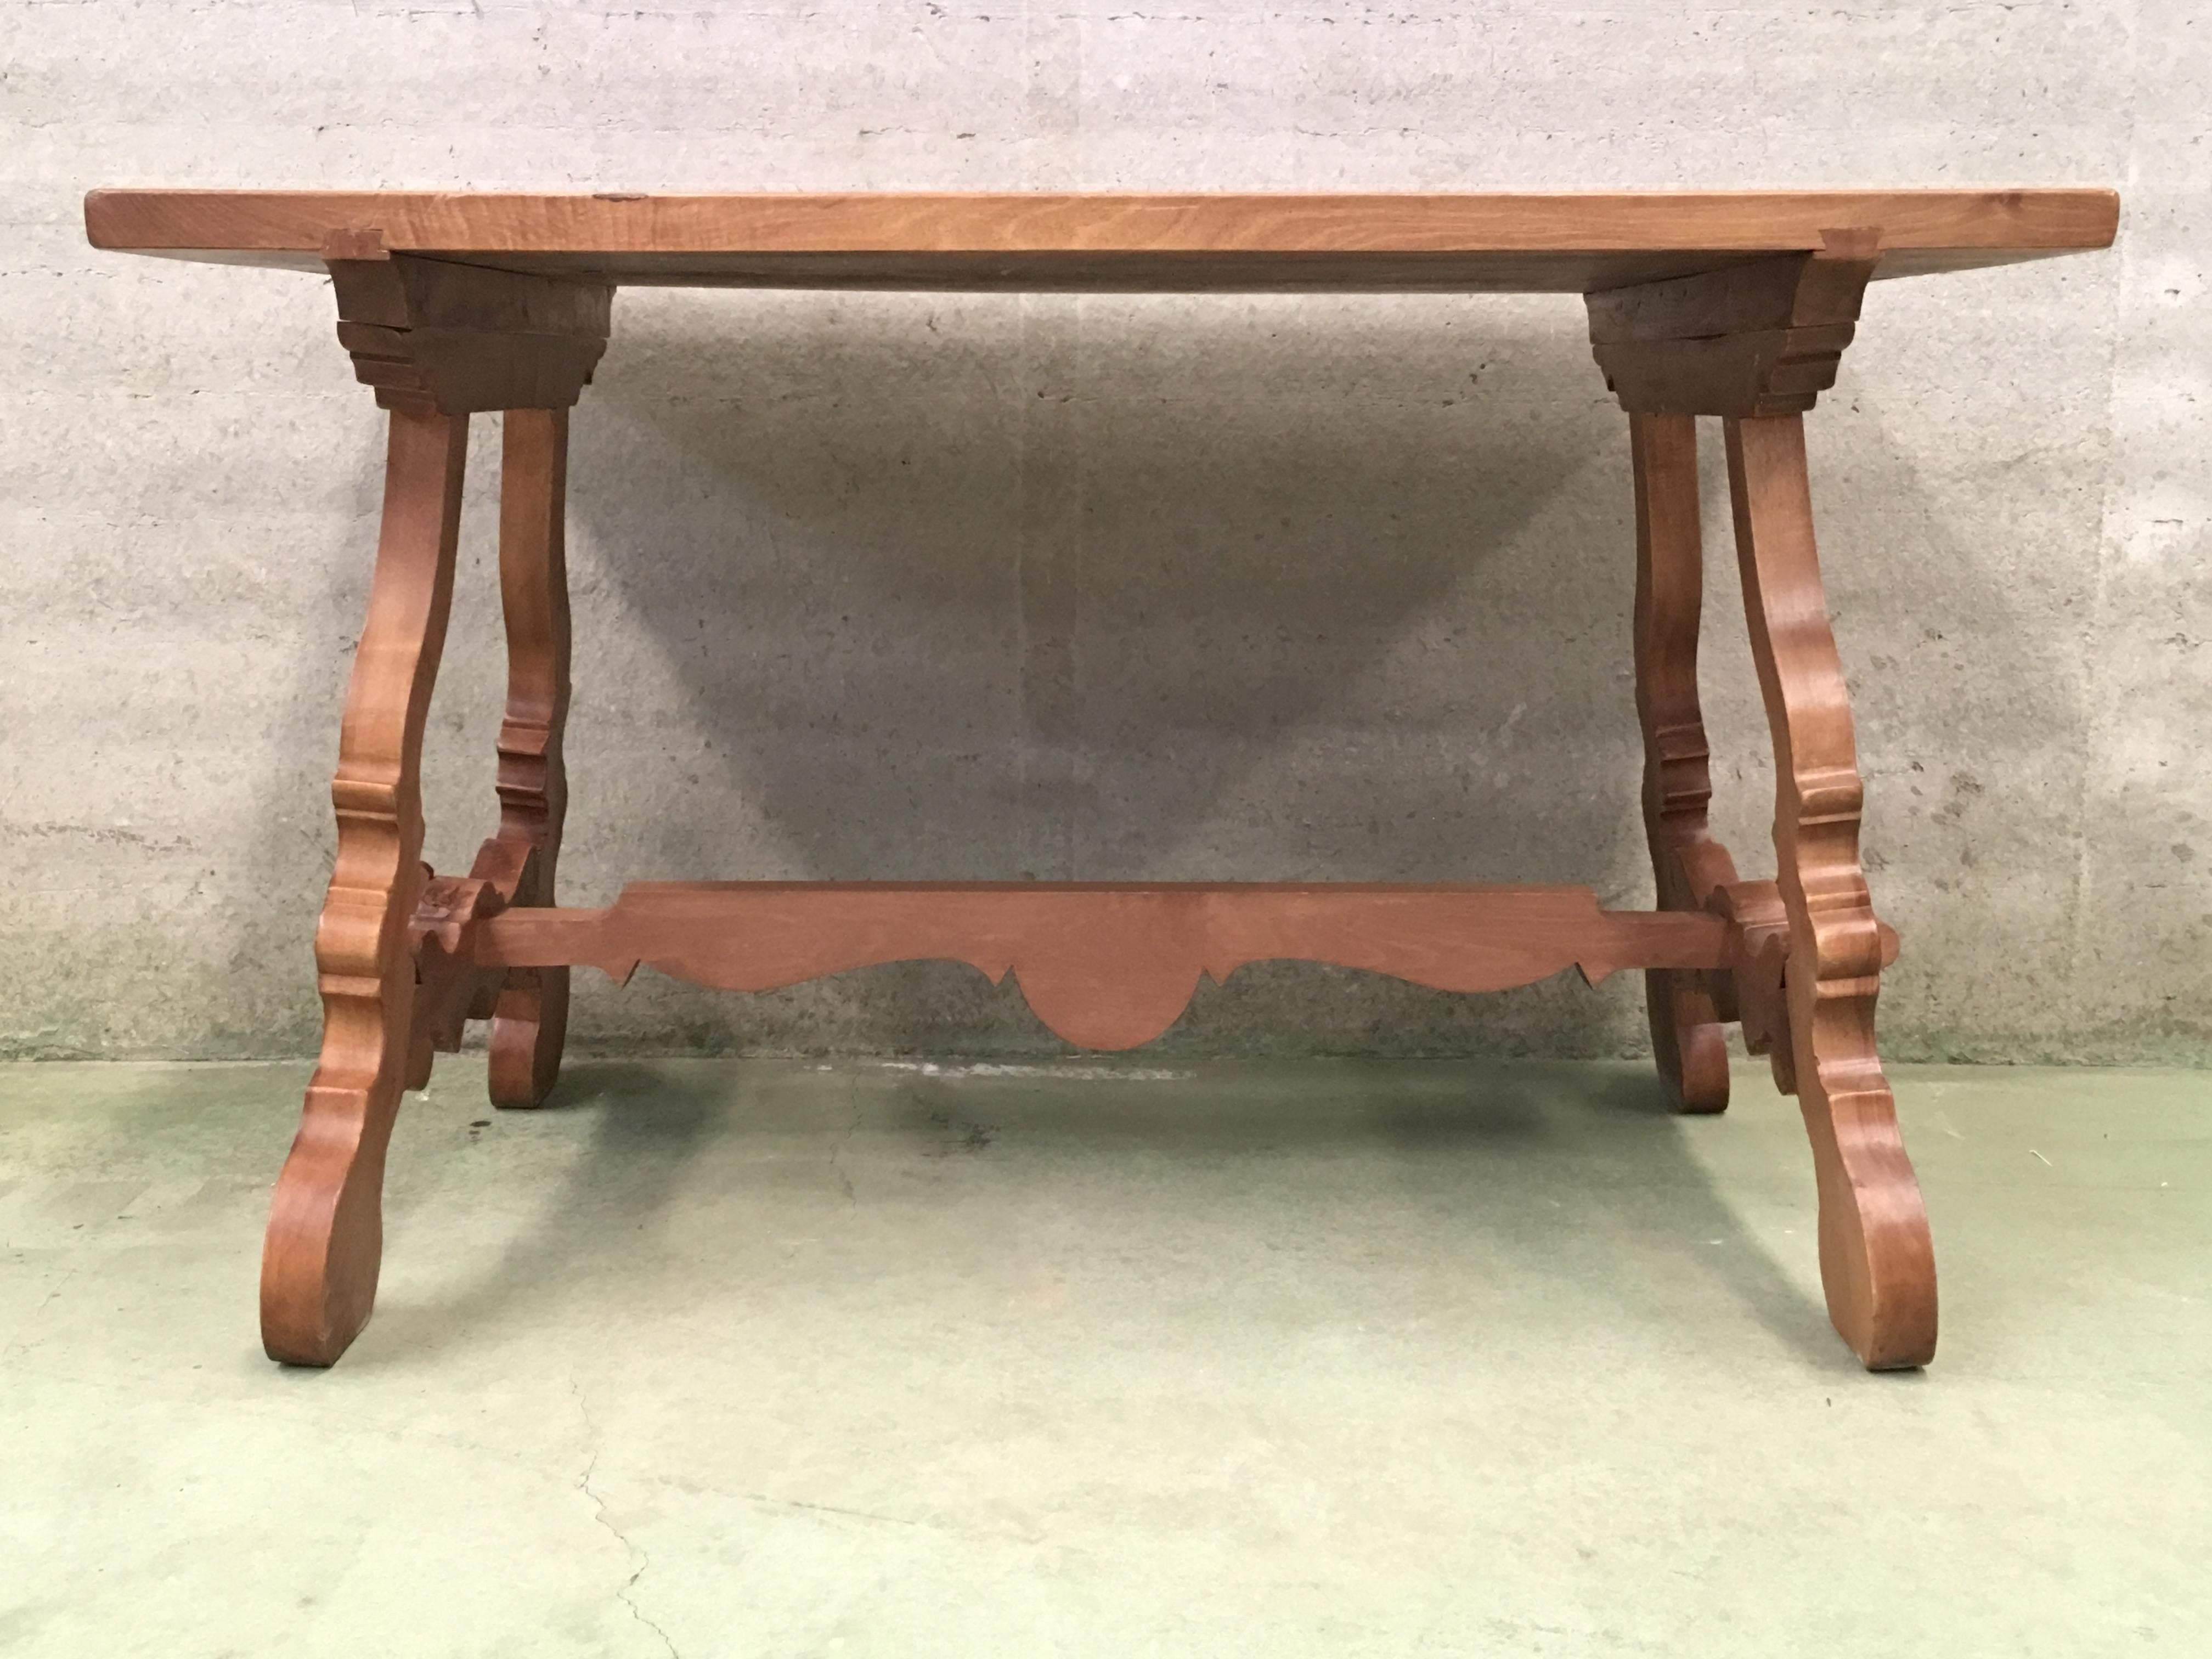 Spanish Colonial Early 20th Century Spanish Pine Trestle Table with Wood Stretcher